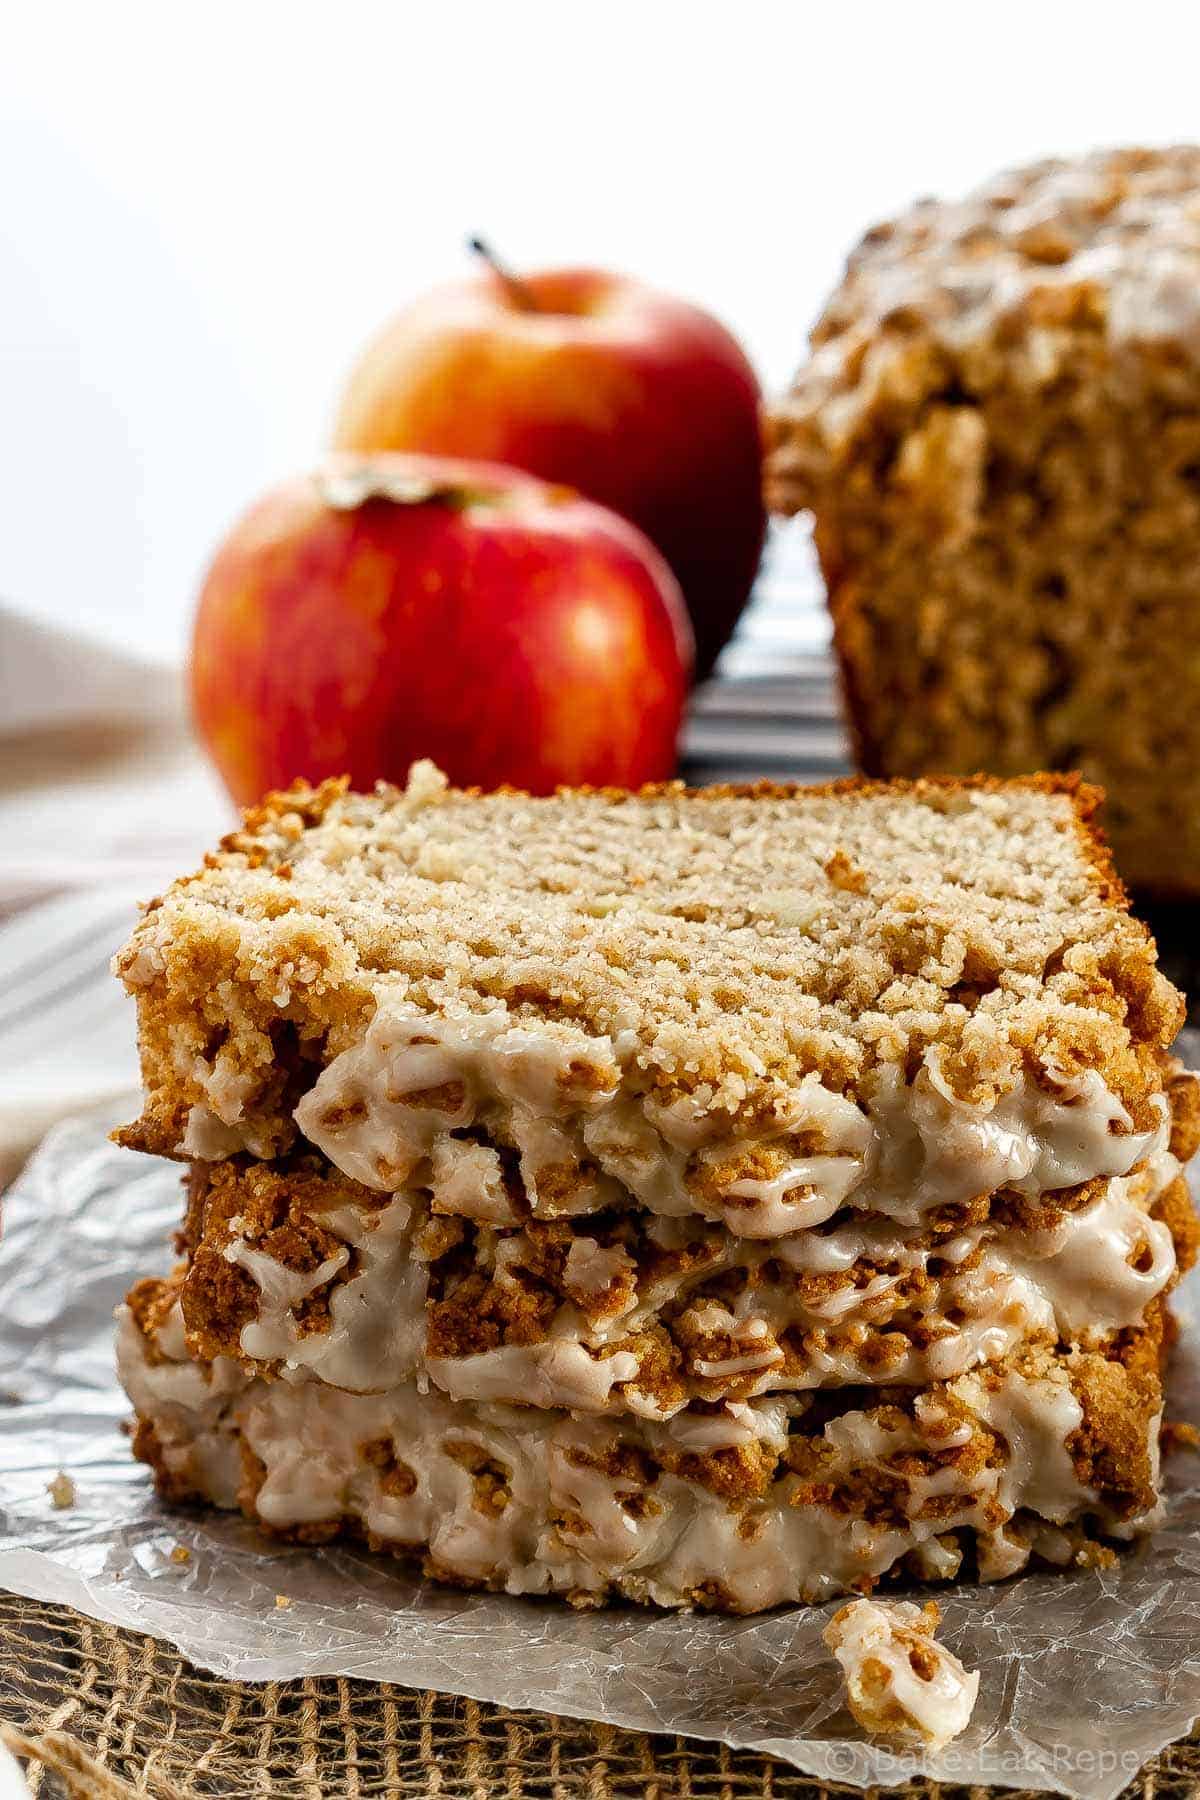 Apple bread with crumble topping